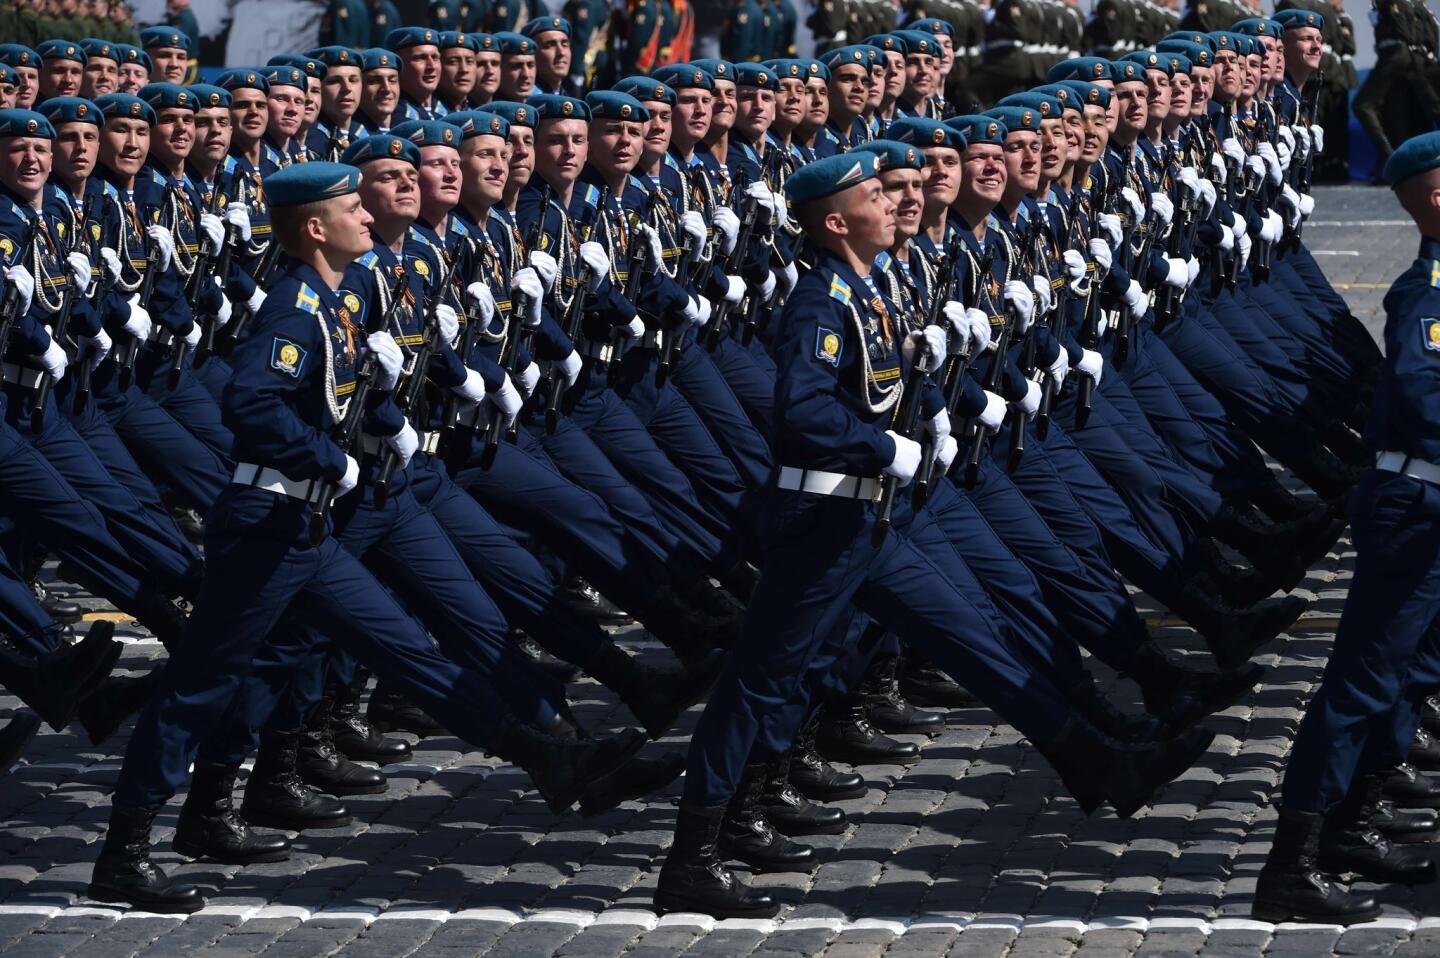 Russian soldiers march through Red Square during the Victory Day military parade in Moscow on May 9, 2015.